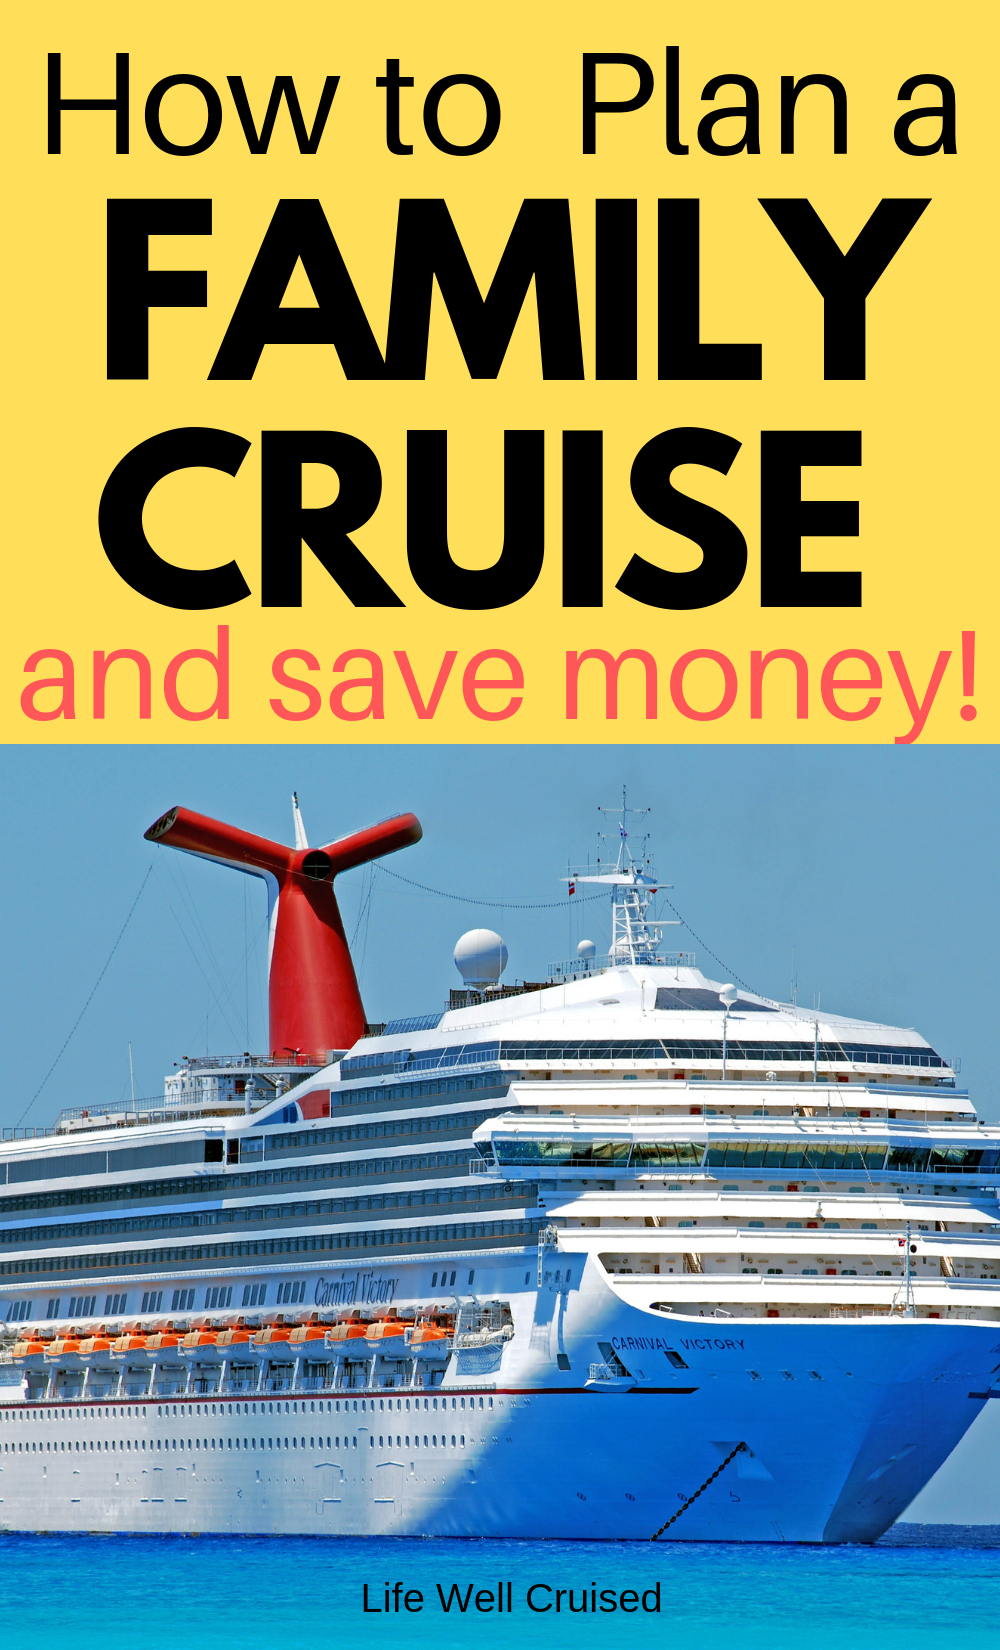 20 Frugal Ways to Save on Your Family Cruise